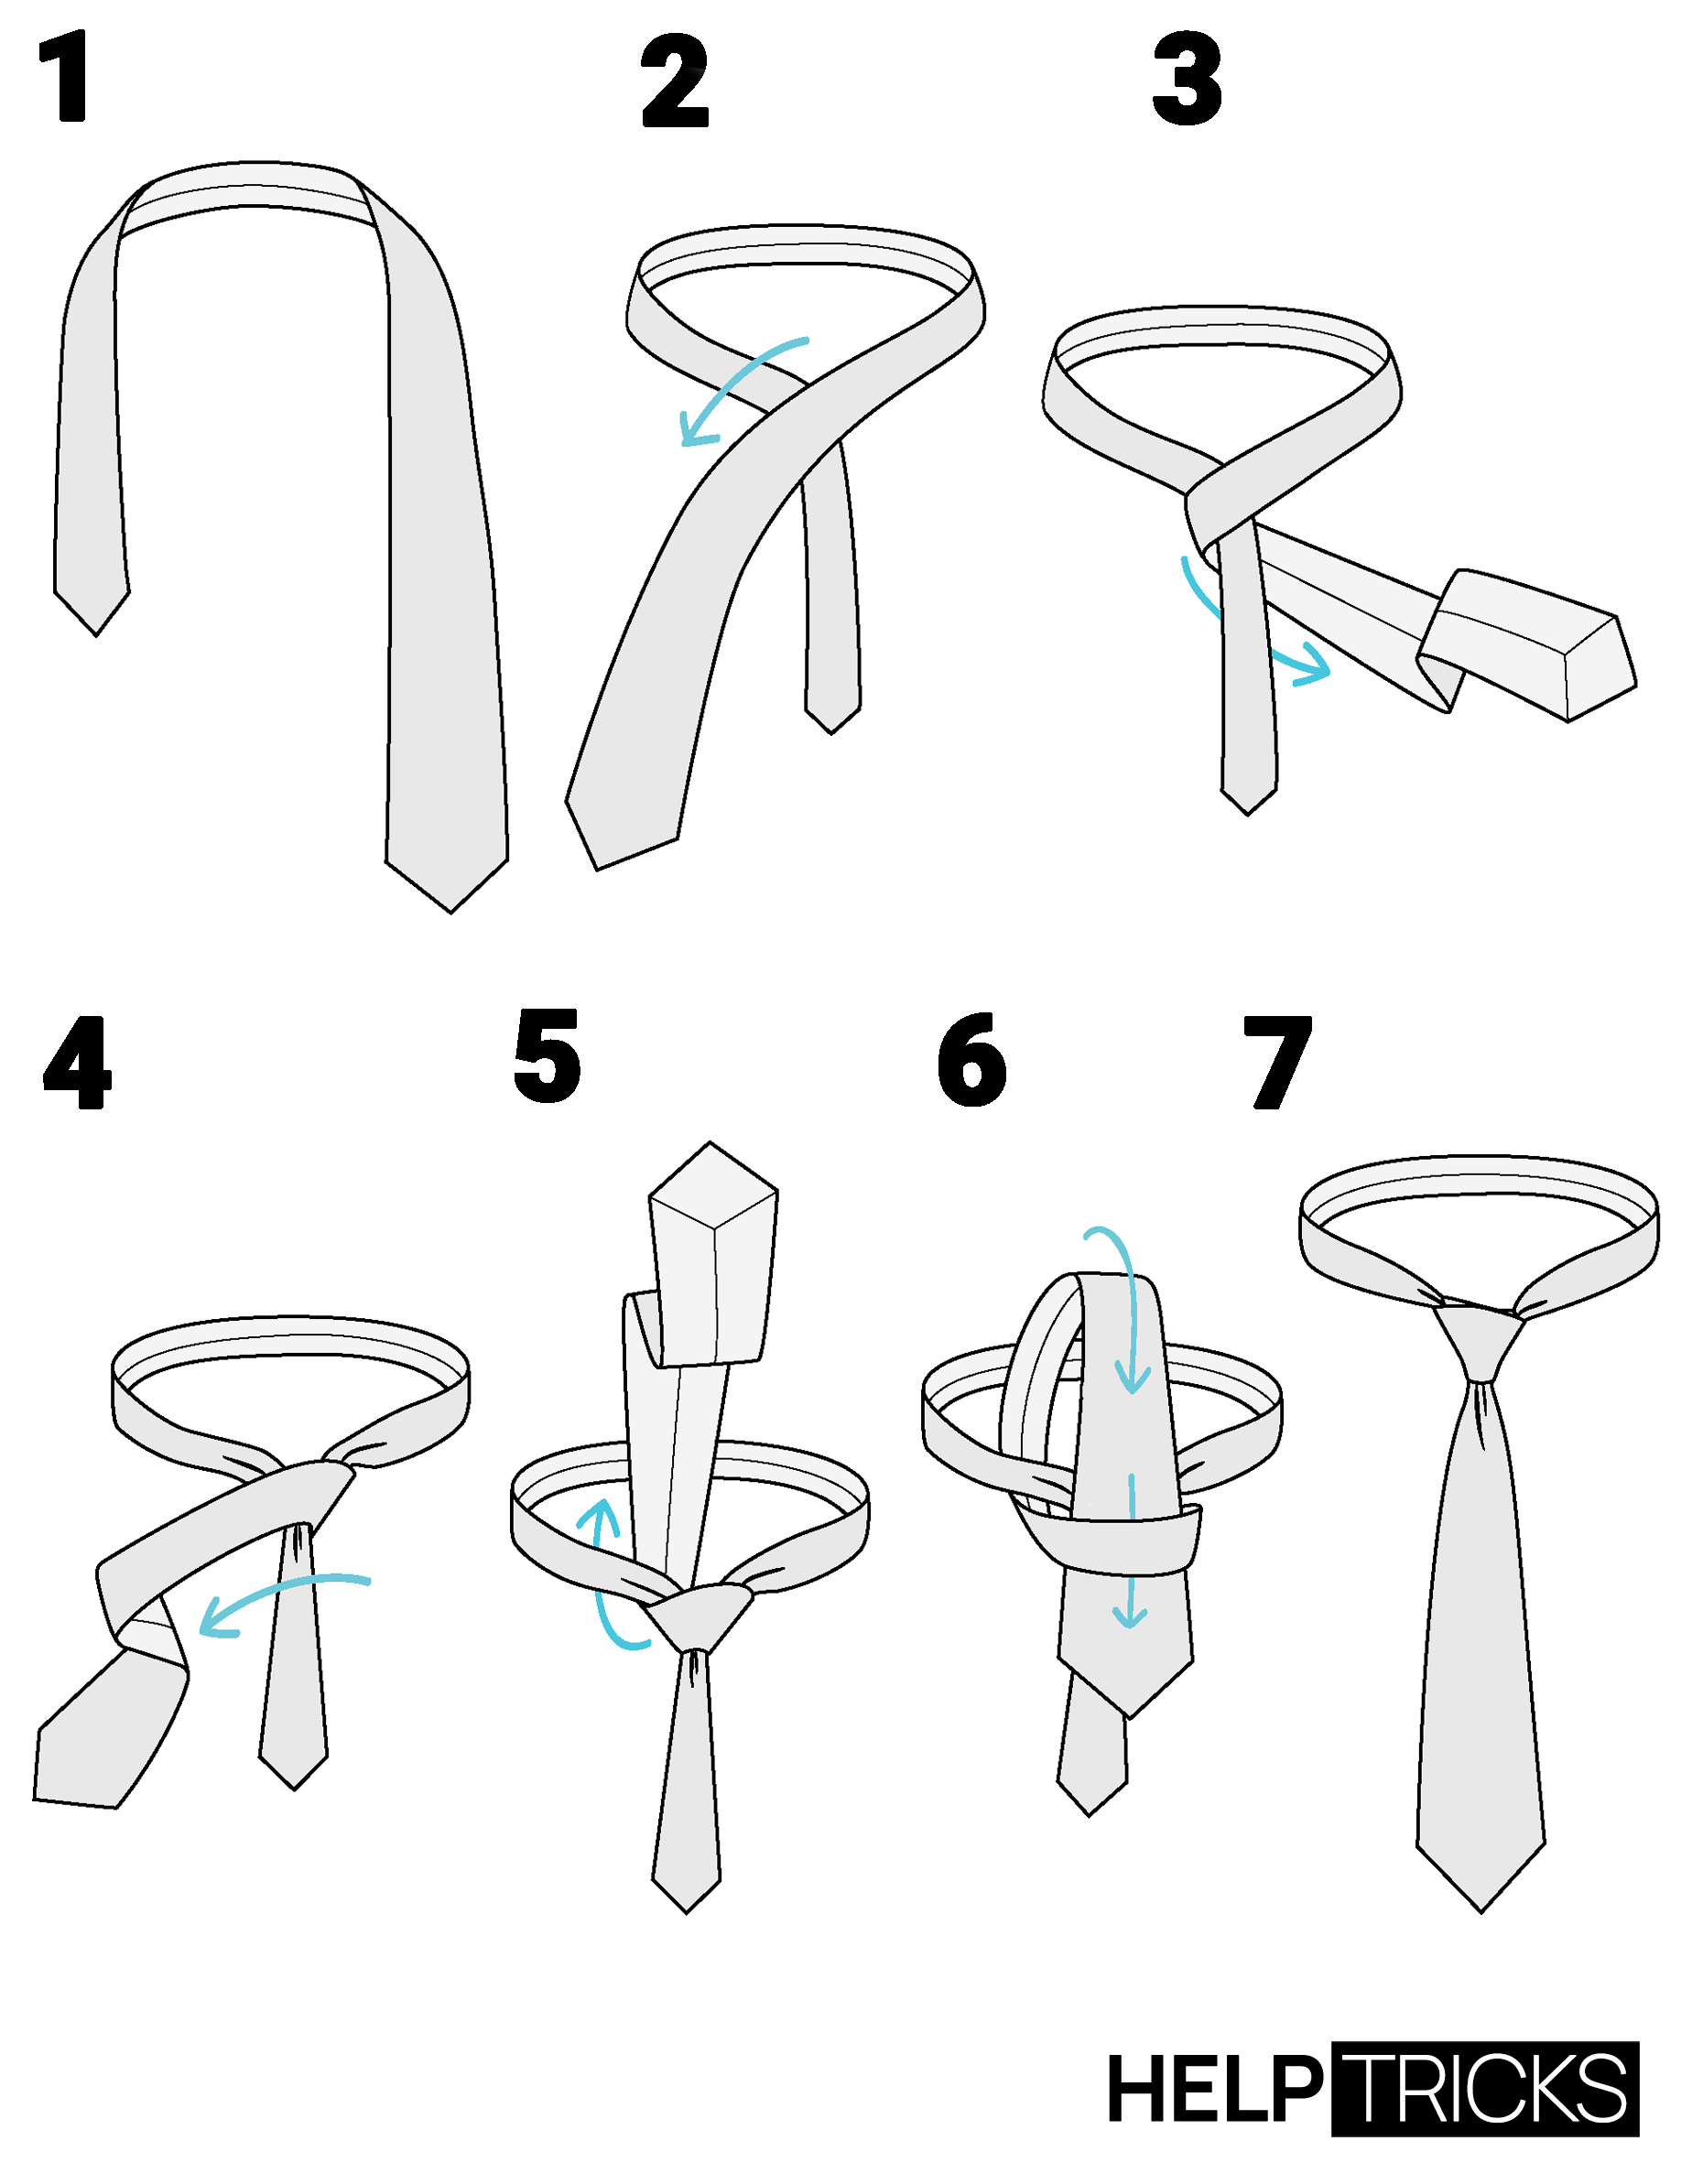 How to tie a Tie - Four In Hand Knot